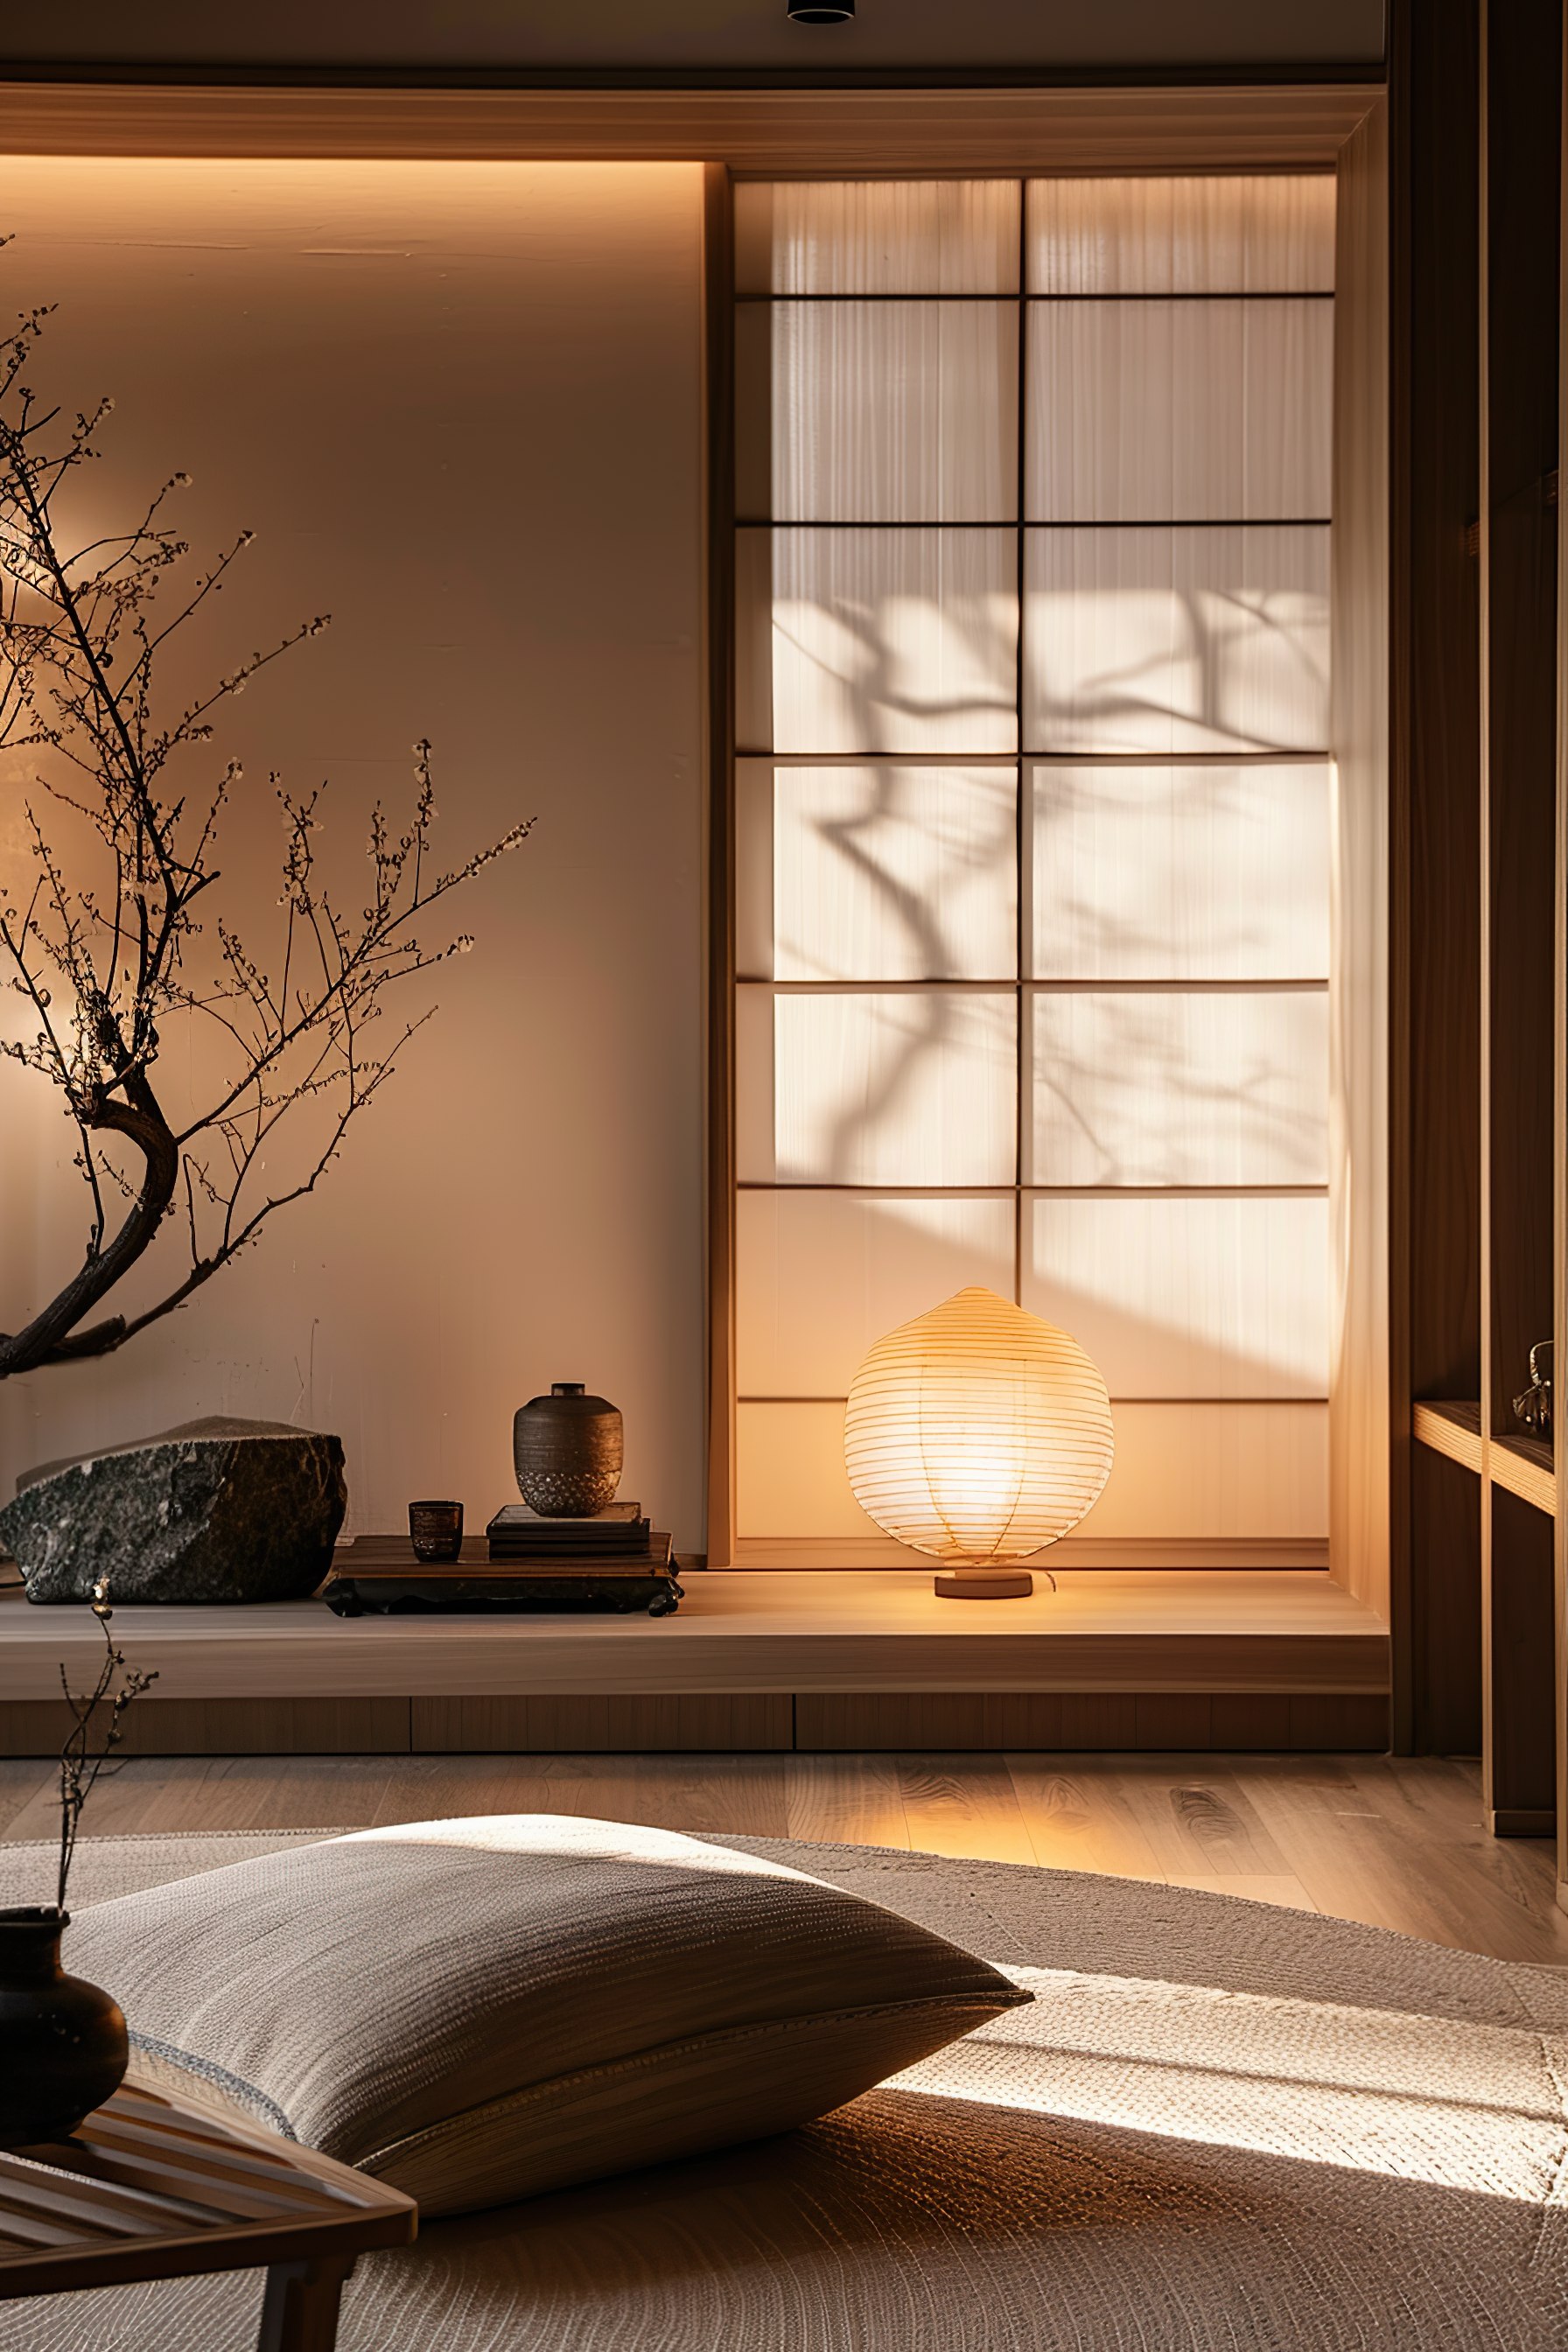 Cozy Japanese-style room with soft lighting, shoji screen, floor cushion, and traditional decor.